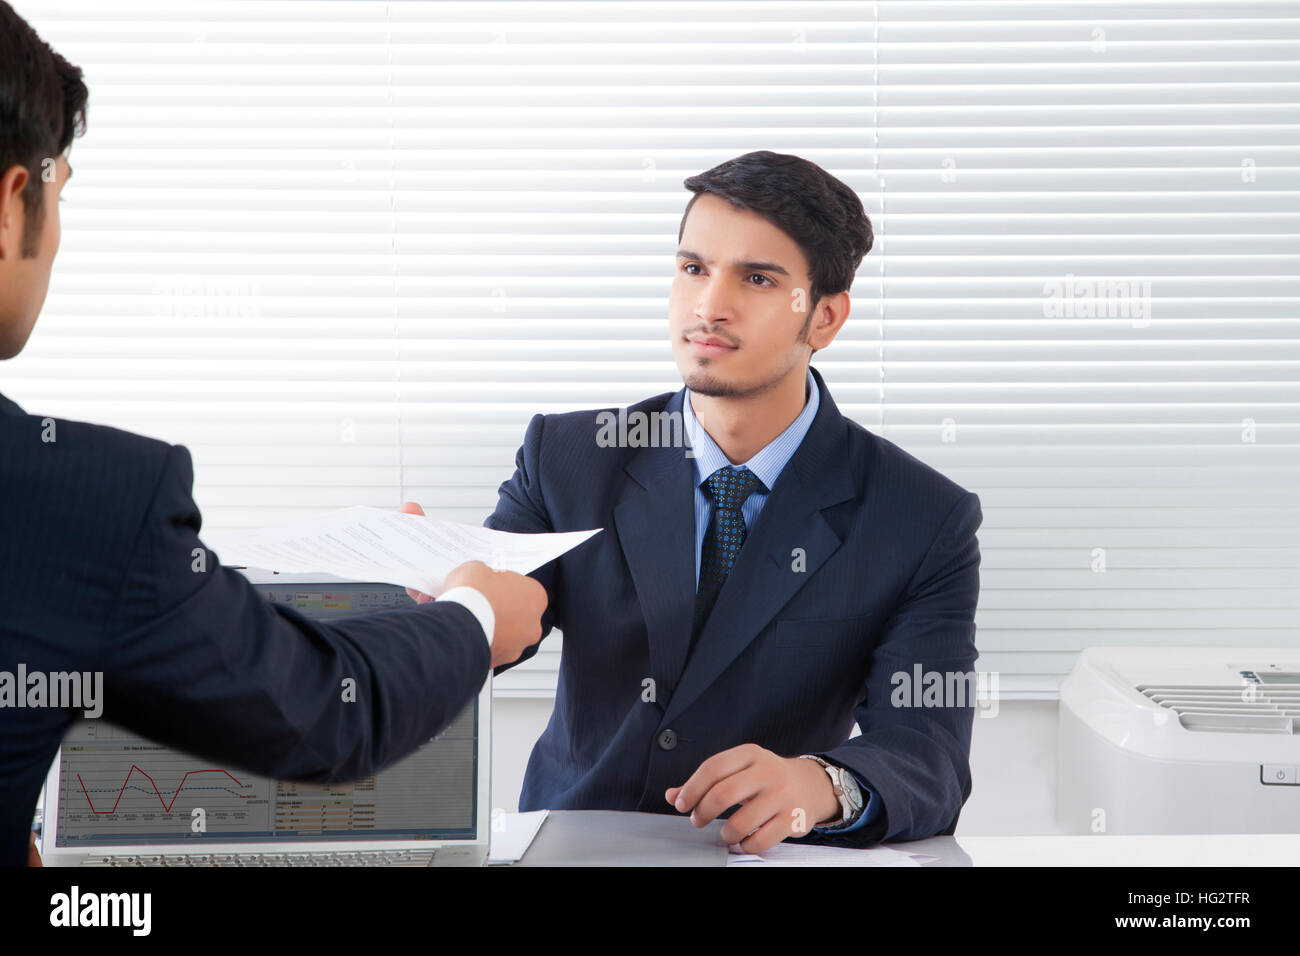 Businessman handing over document to young professional man in office Stock Photo